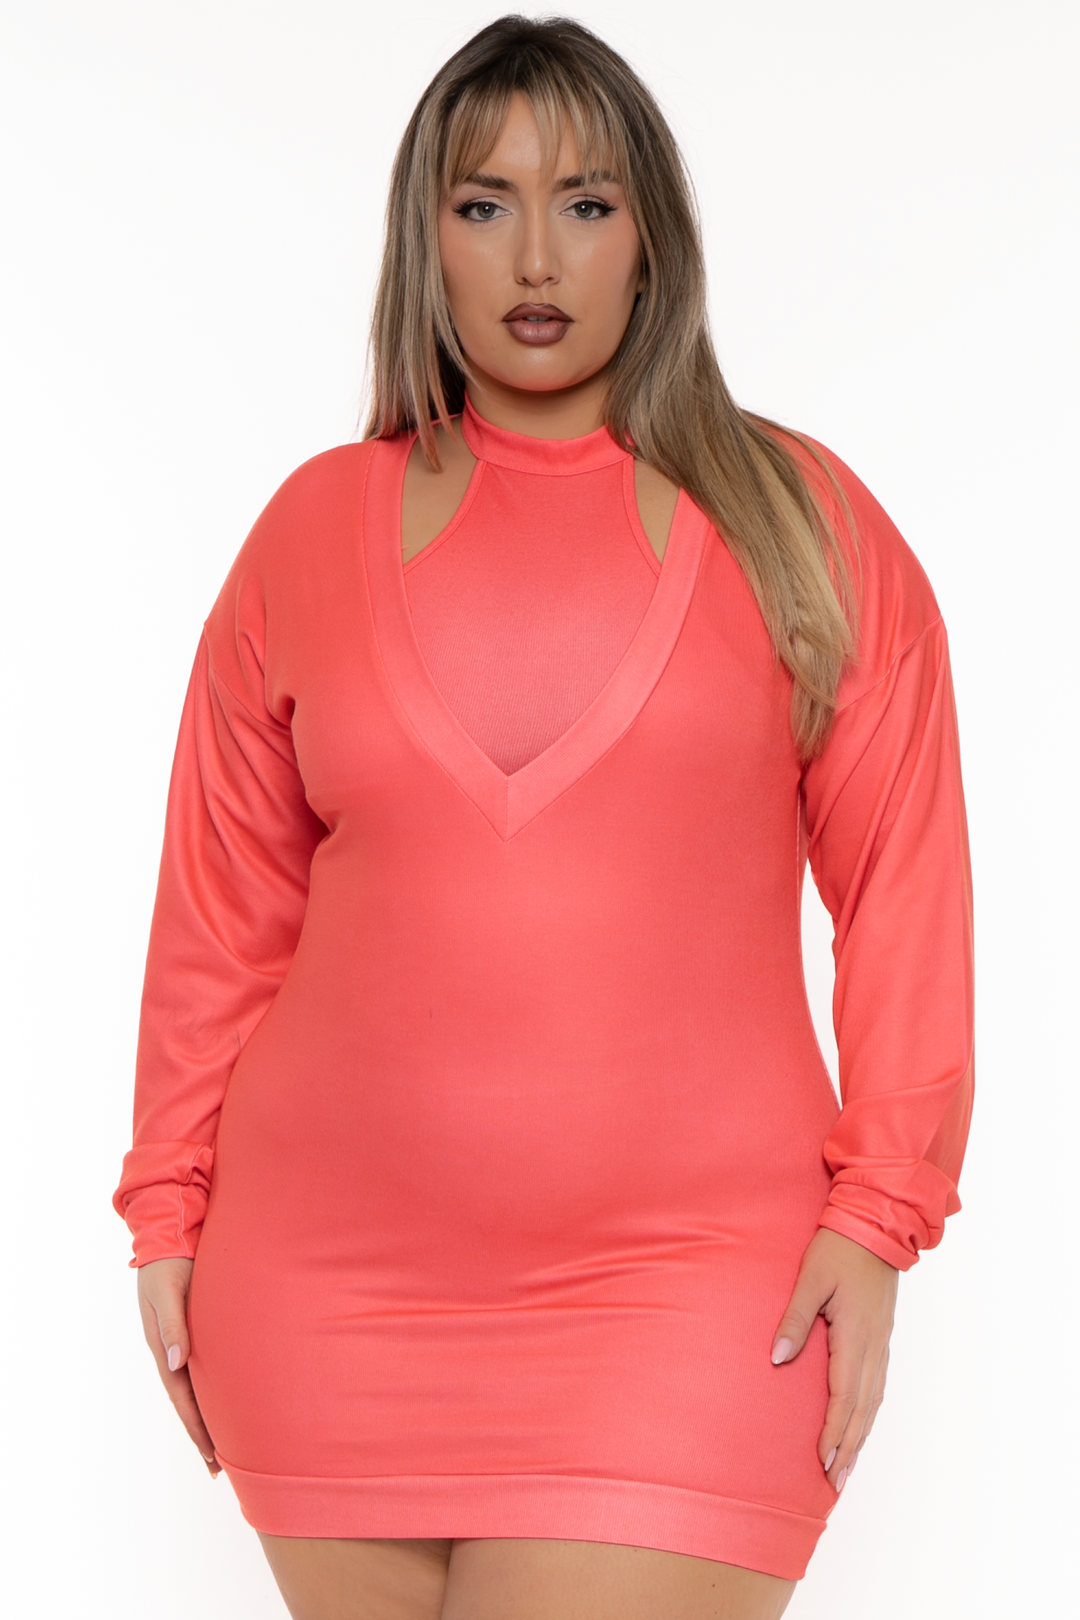 CHICCTHY TOP Matching Sets Plus Size Sweater Dress & Crop top Set  - Peach